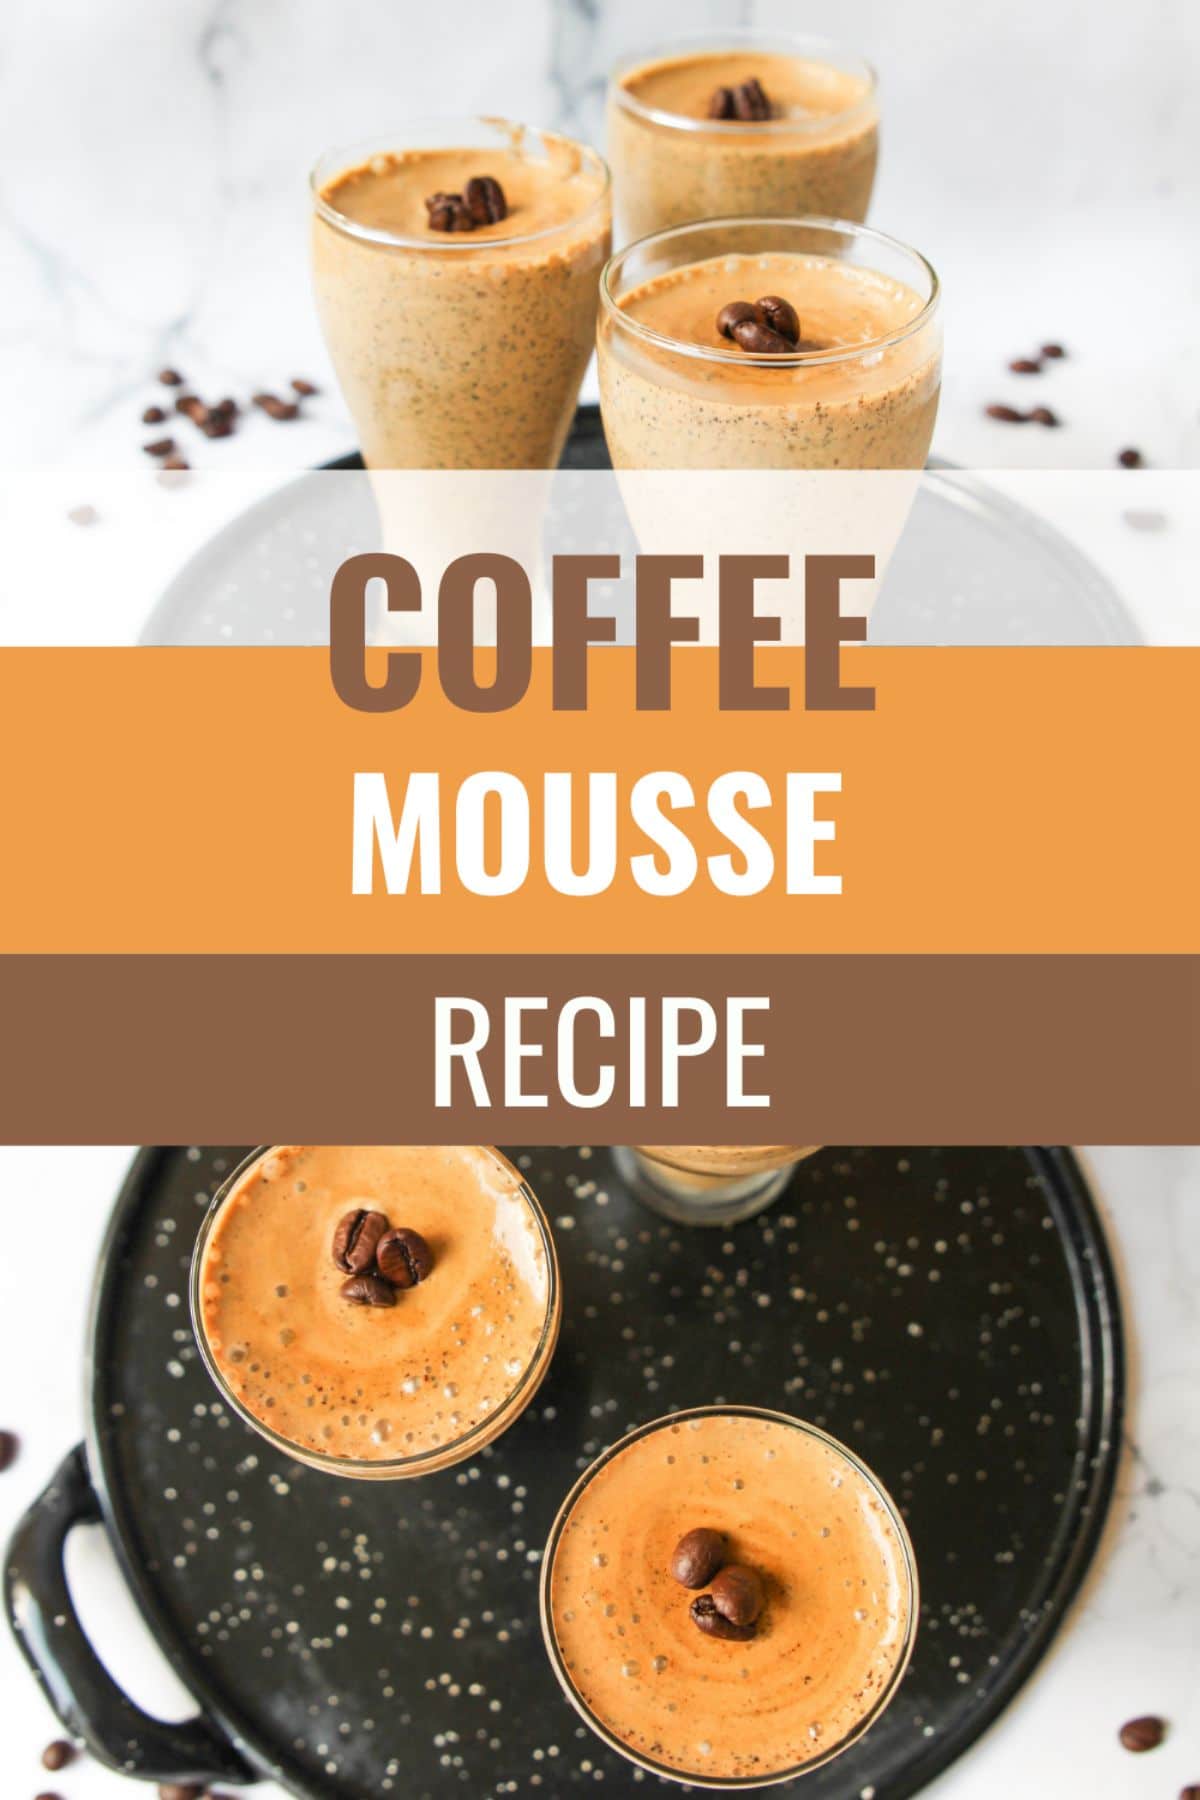 Coffee Mousse is a light and fluffy mousse and makes a quick and delicious coffee-flavored dessert. This mousse is very simple to make. #coffeemousse #coffee #mousse #dessert #recipe via @wondermomwannab